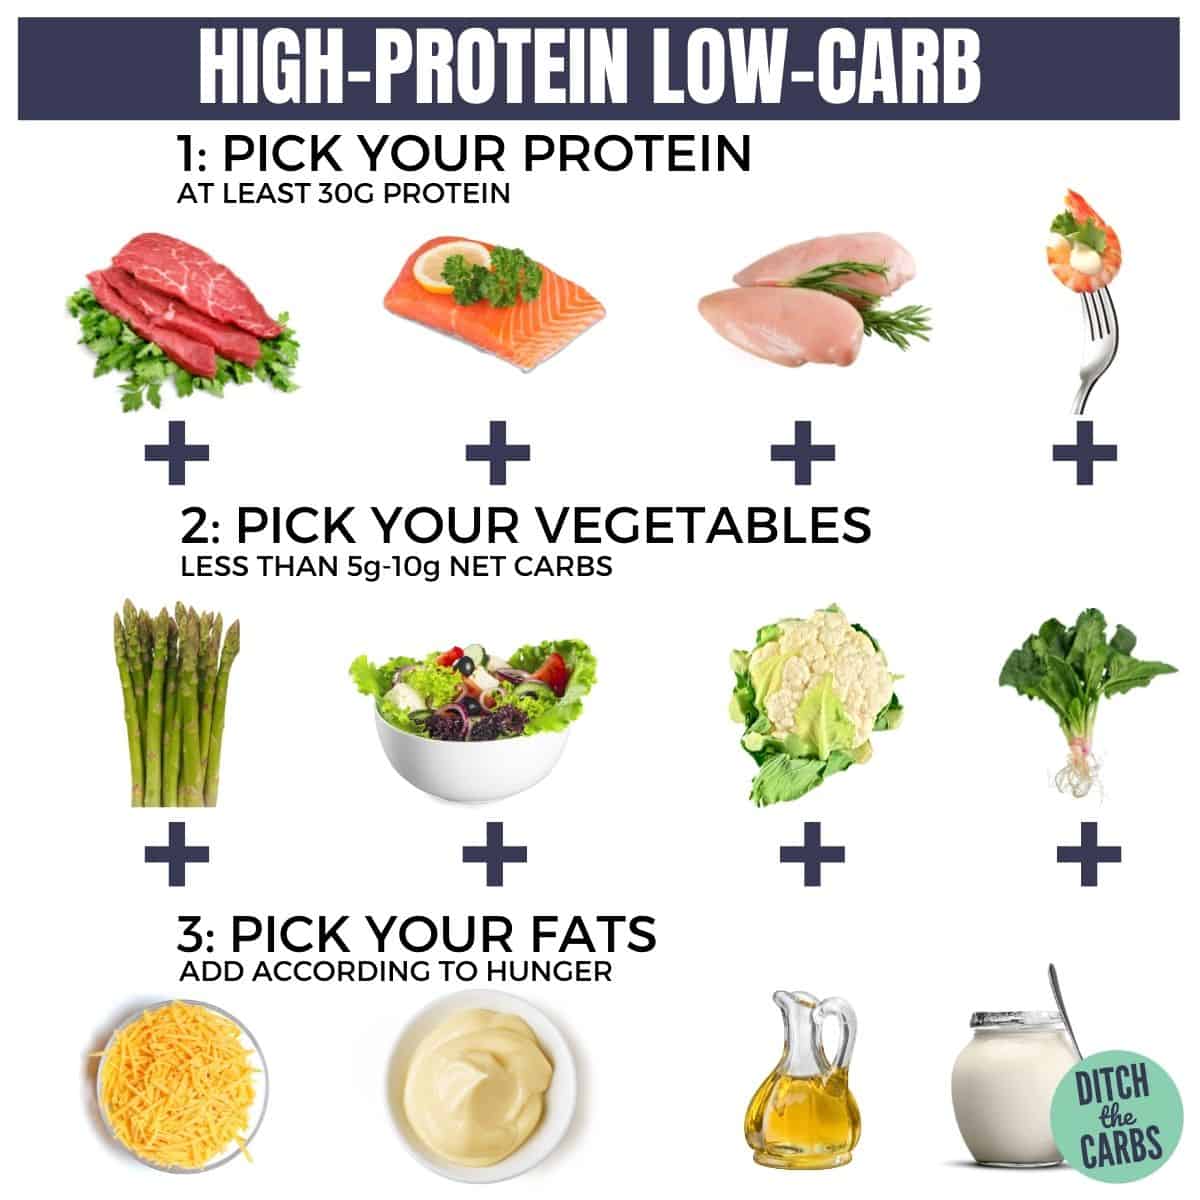 chart showing how to build the perfect high-protein low-carb meal